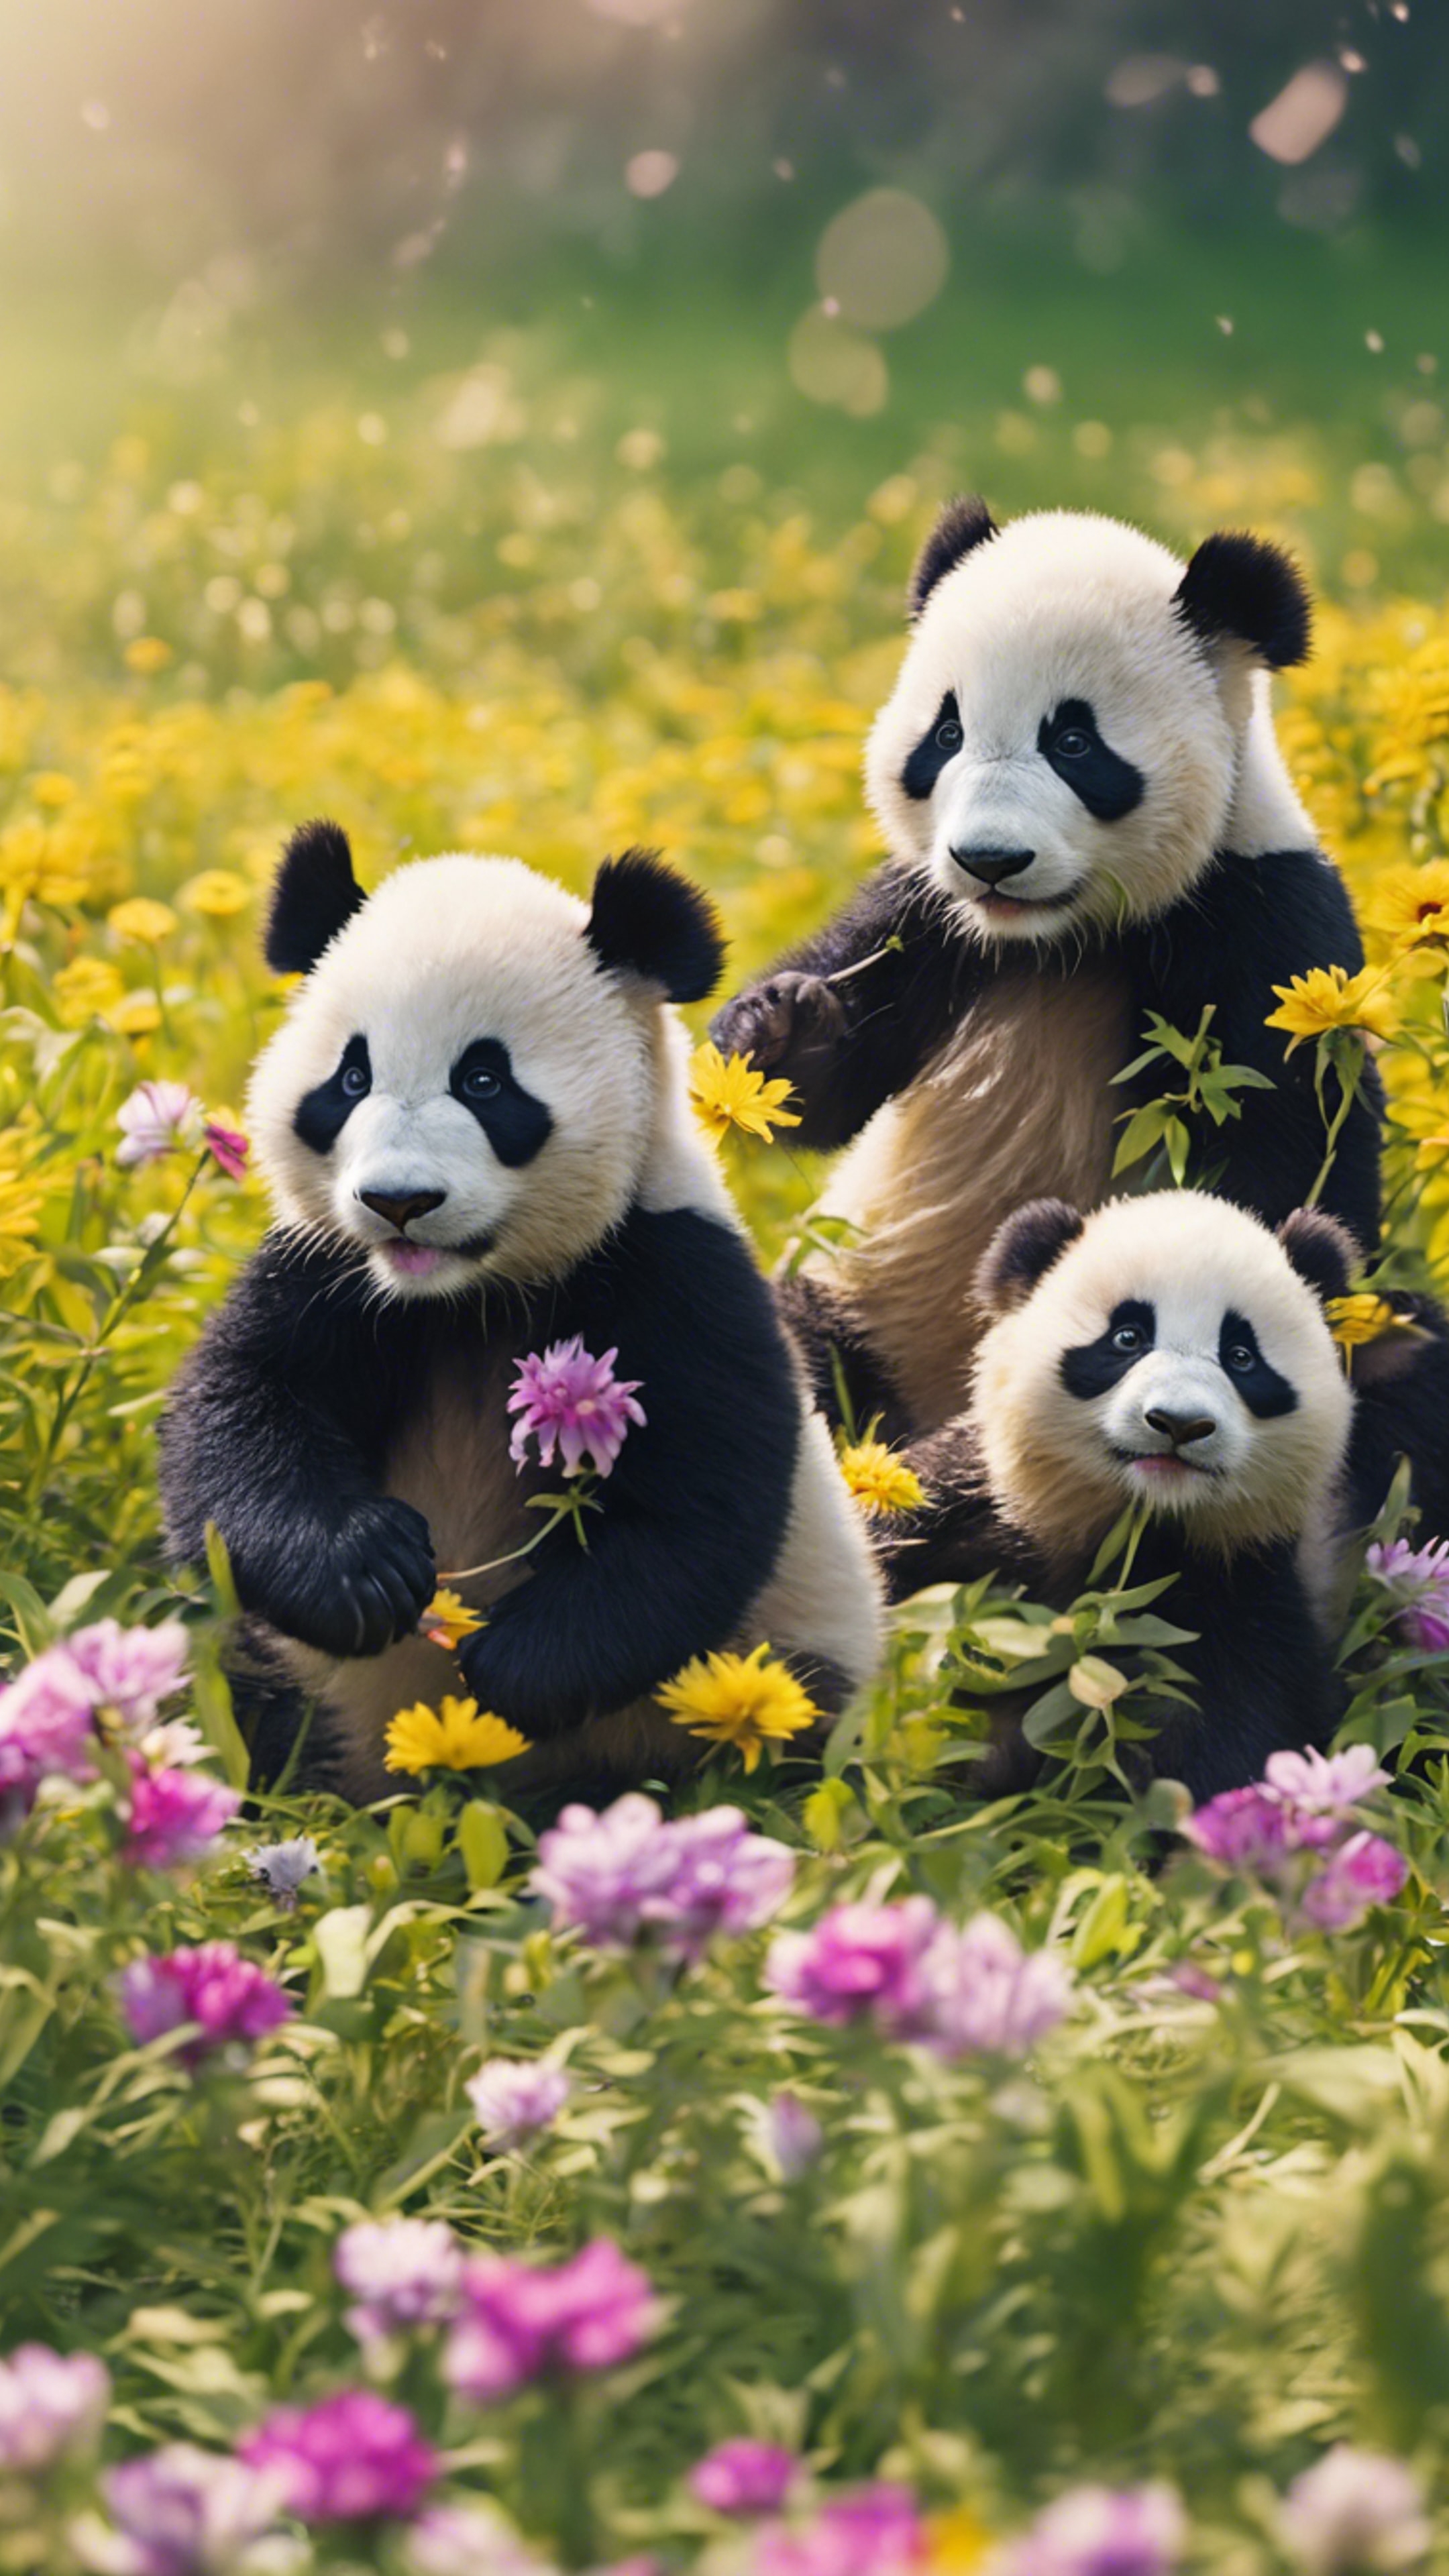 A group of lively panda cubs merrily playing tag in a field full of bright spring flowers. วอลล์เปเปอร์[9de4fa100eef4aefa43d]